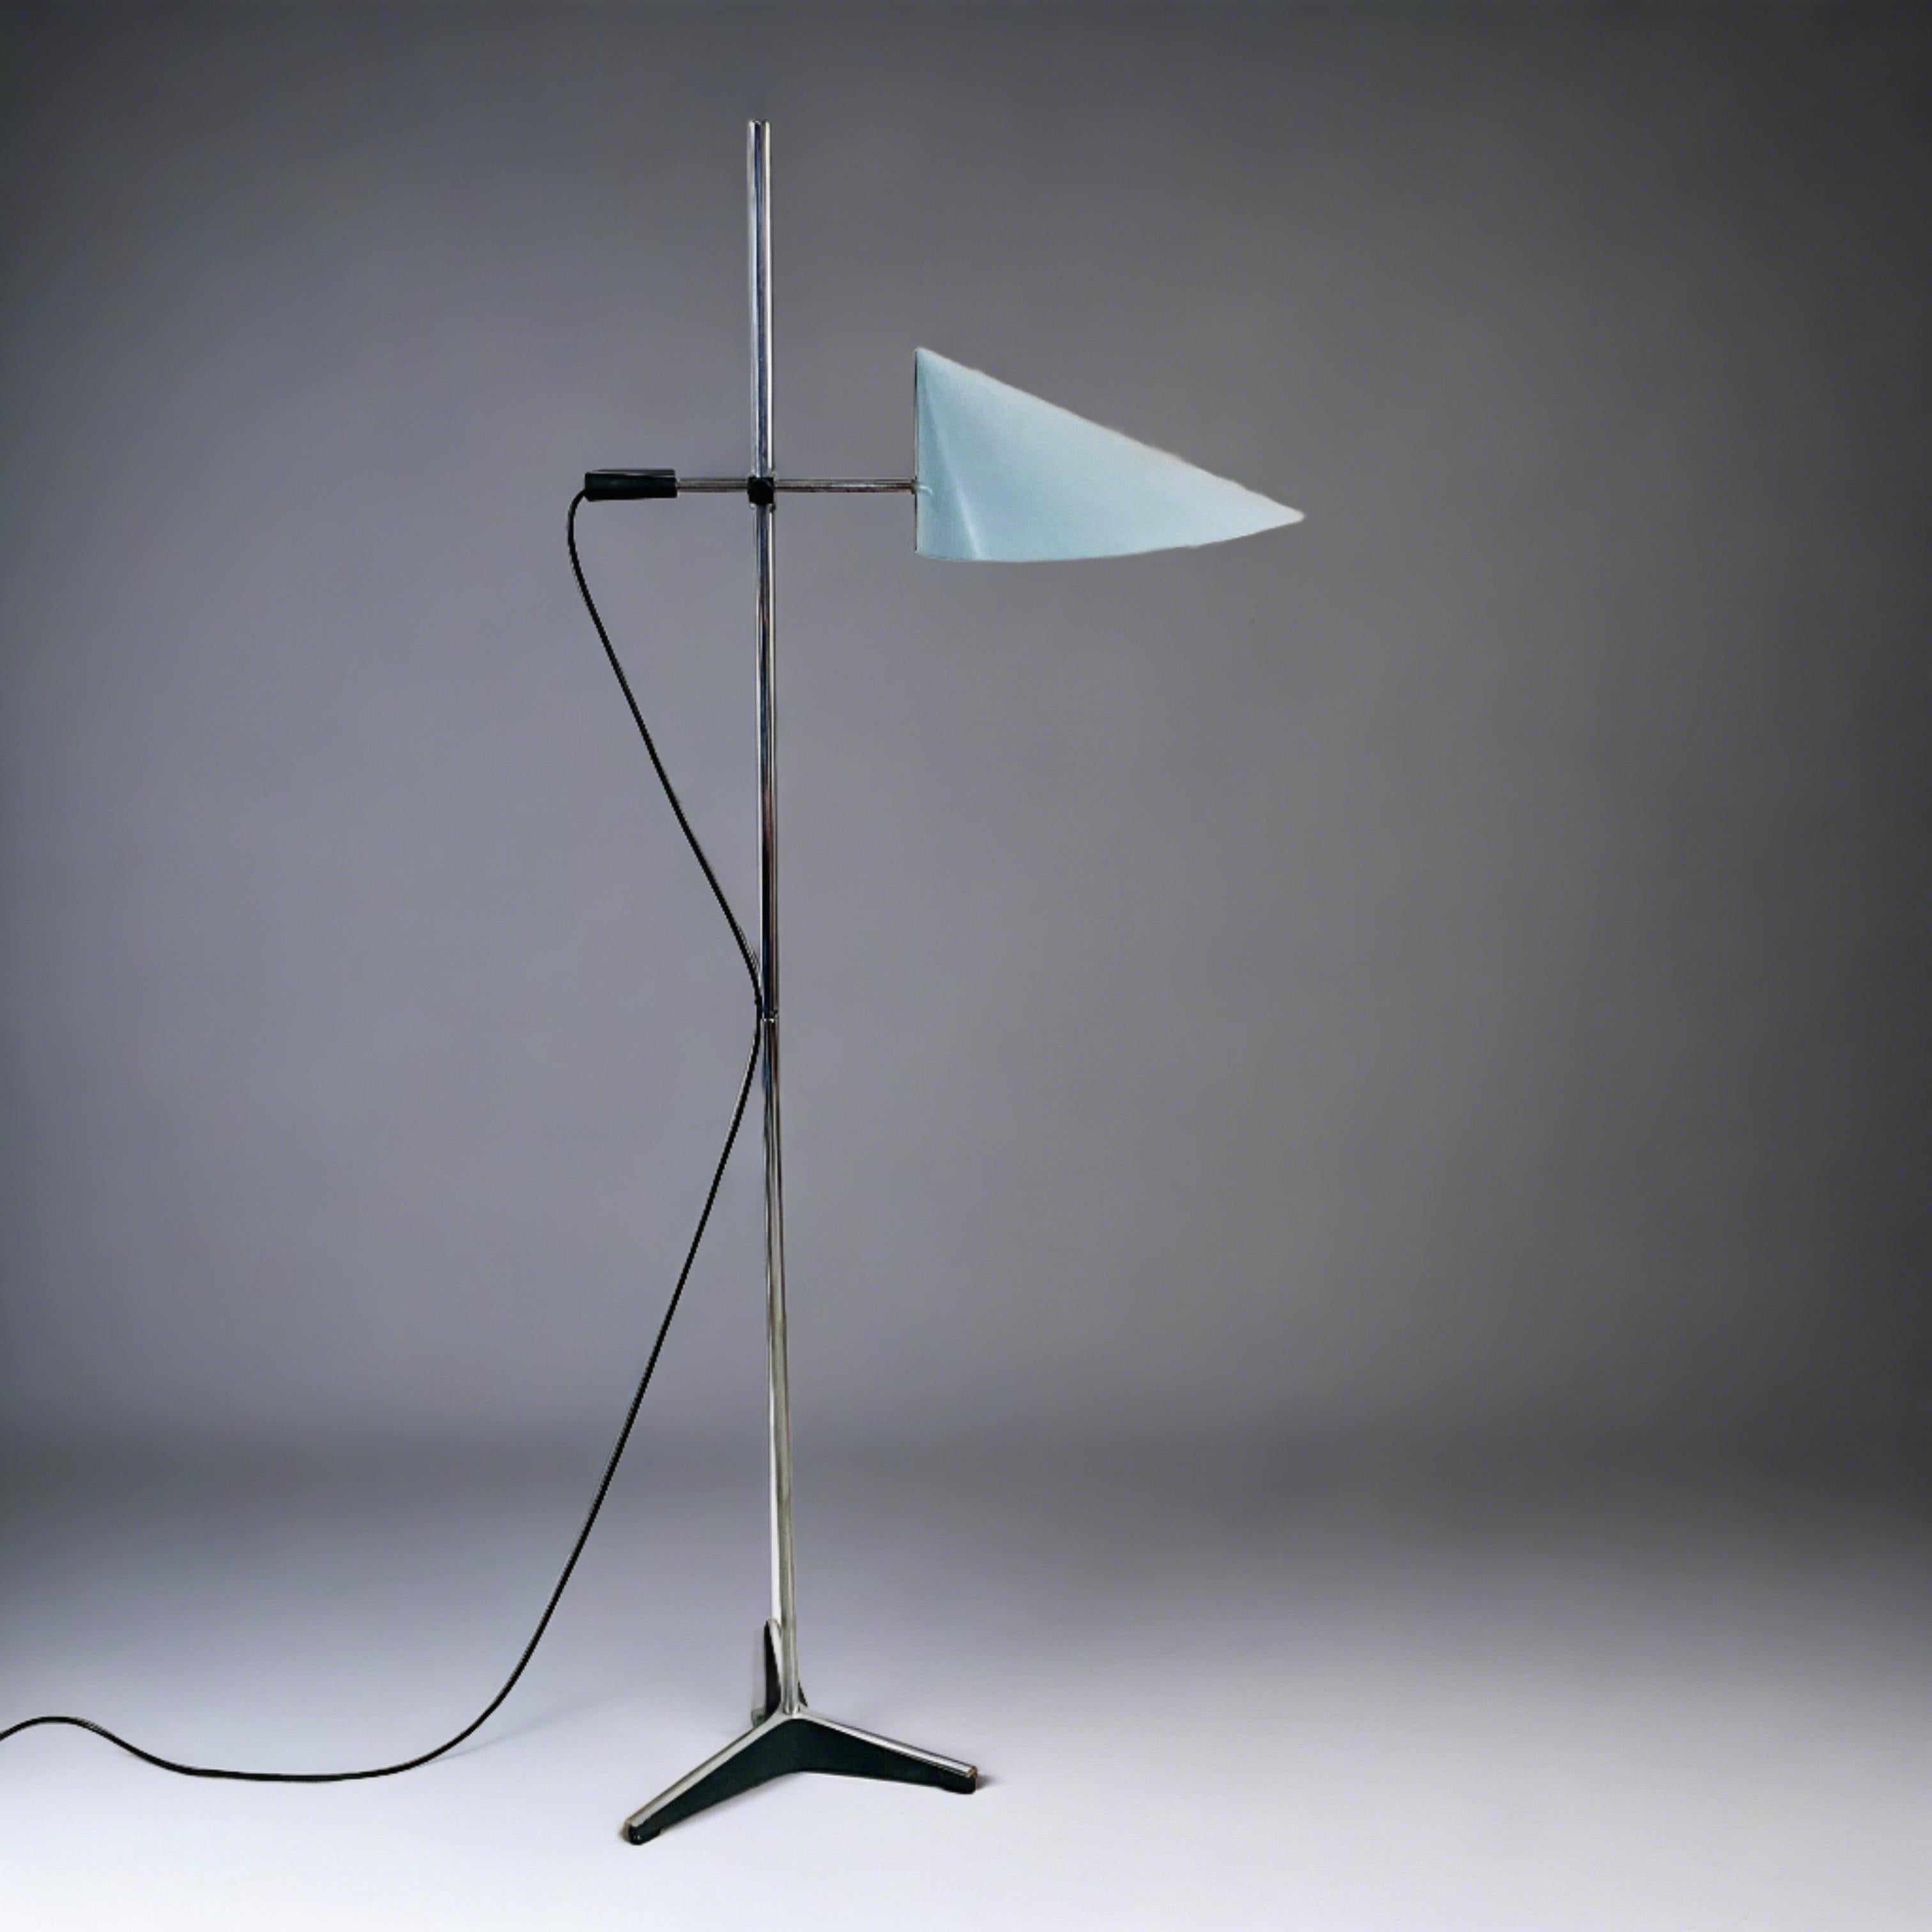 Mid-20th Century Mid-Century Floor Lamp D-2003 By Jan Jaspers For Raak Amsterdam Netherlands 1950 For Sale